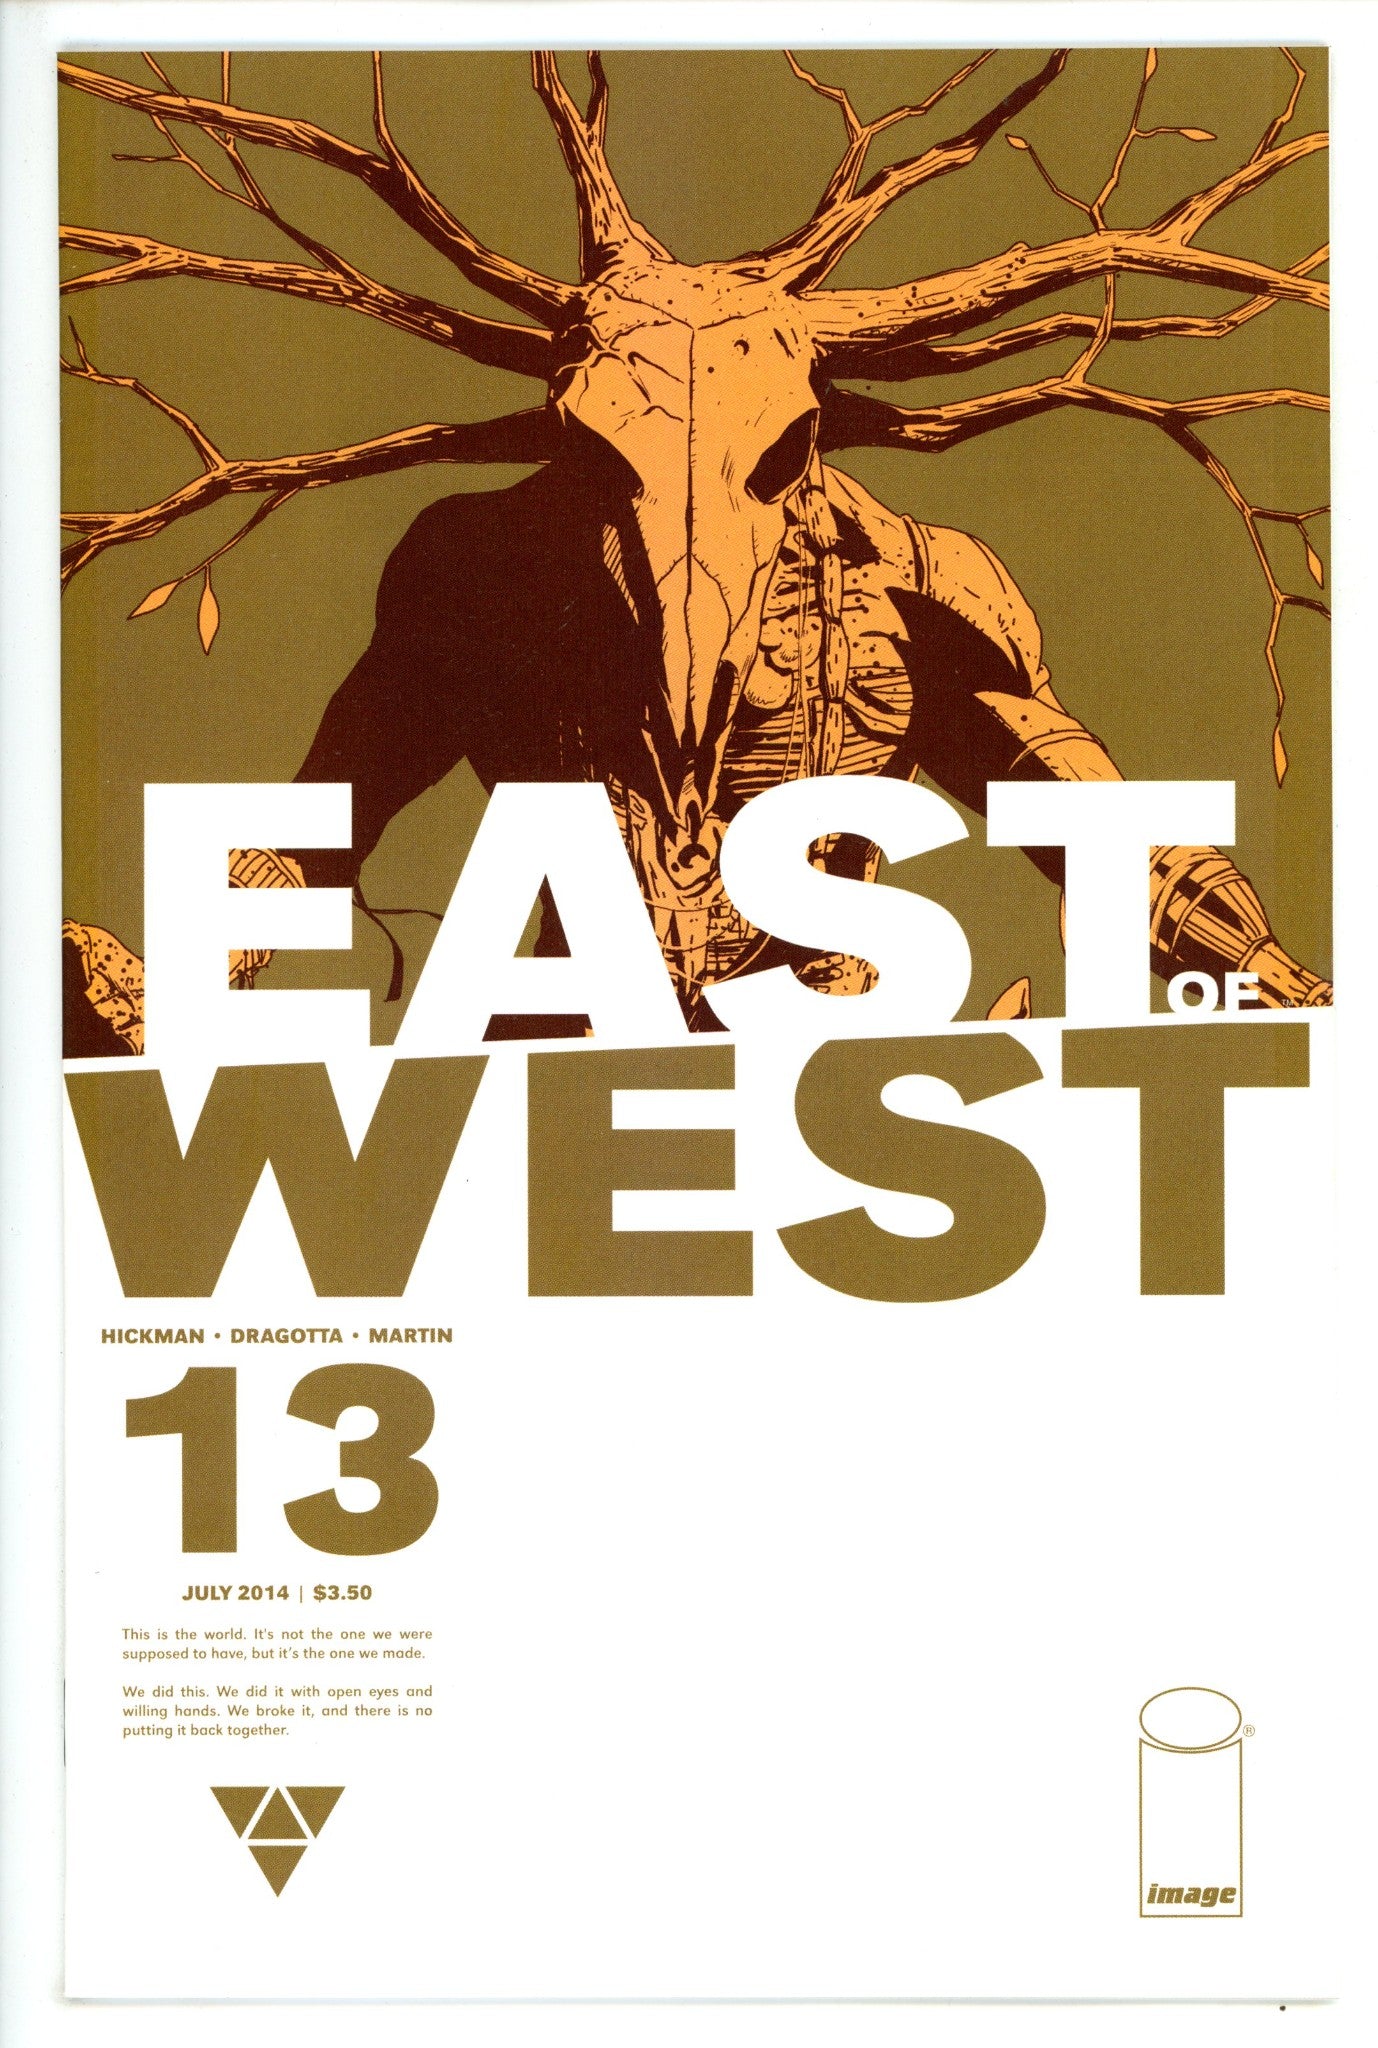 East of West 13